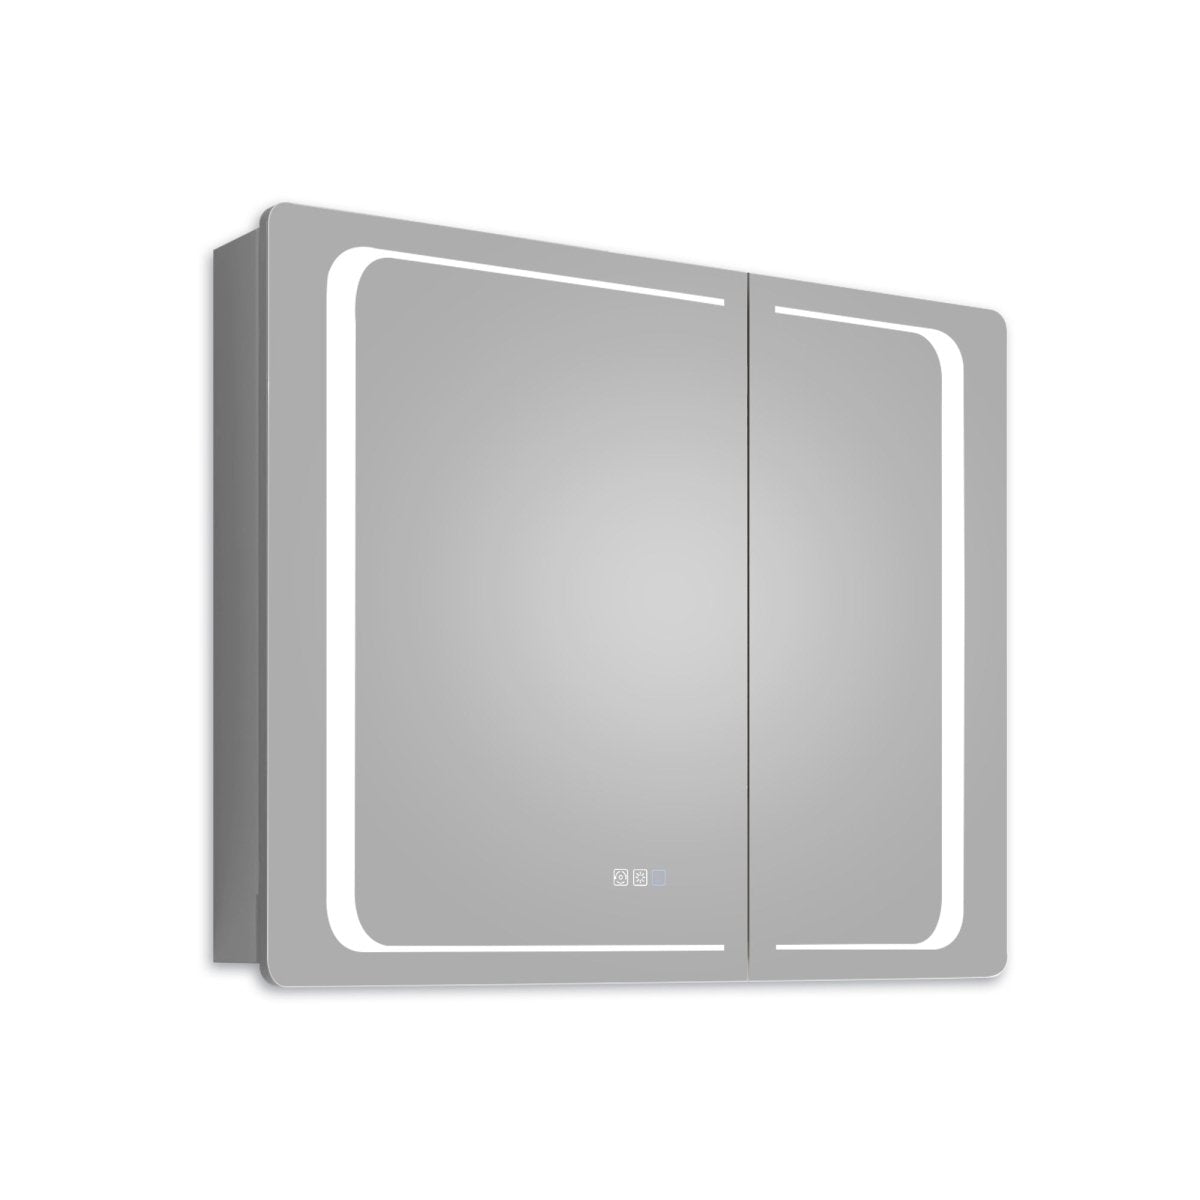 ExBrite 36" W x 30" H LED Lighted Bathroom Medicine Cabinet with Mirror Recessed or Surface Mounted LED Medicine Cabinet - ExBriteUSA